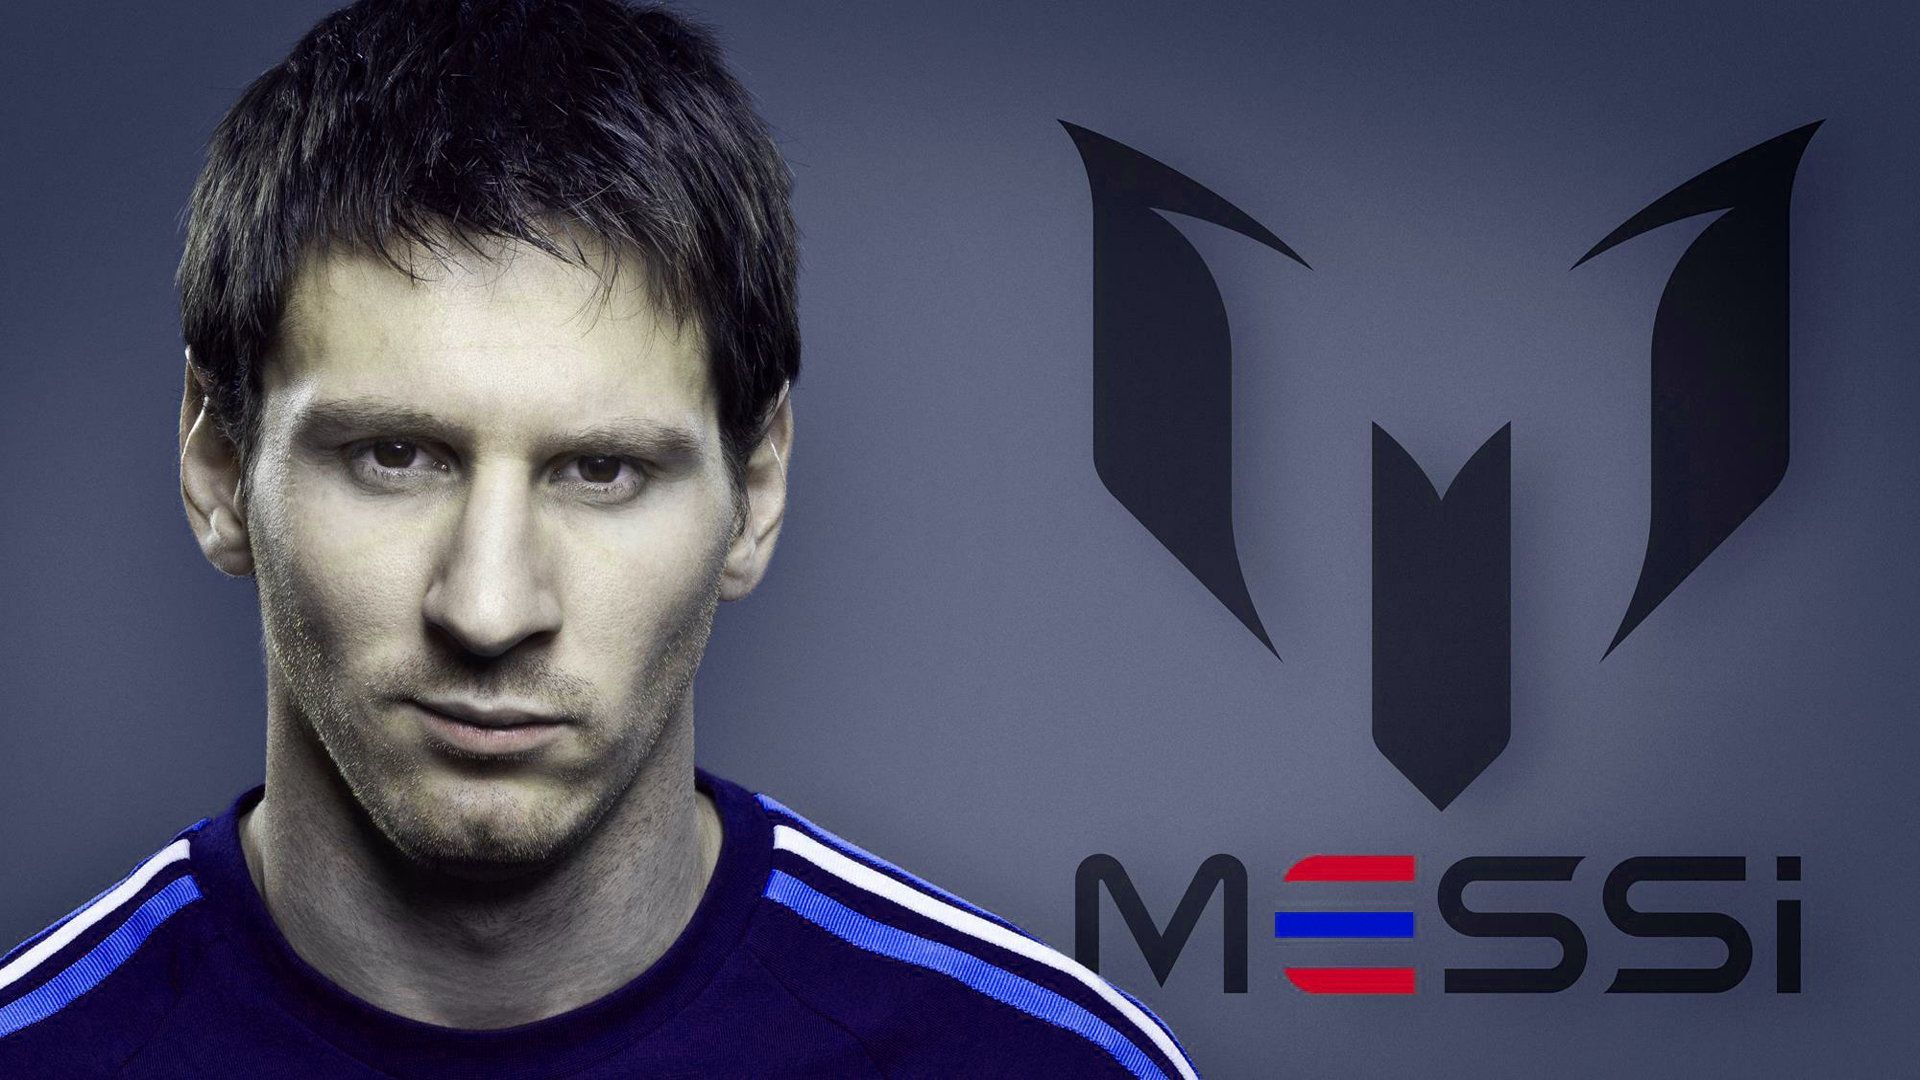 Here some nice wallpaper of this football legend Lionel Messi